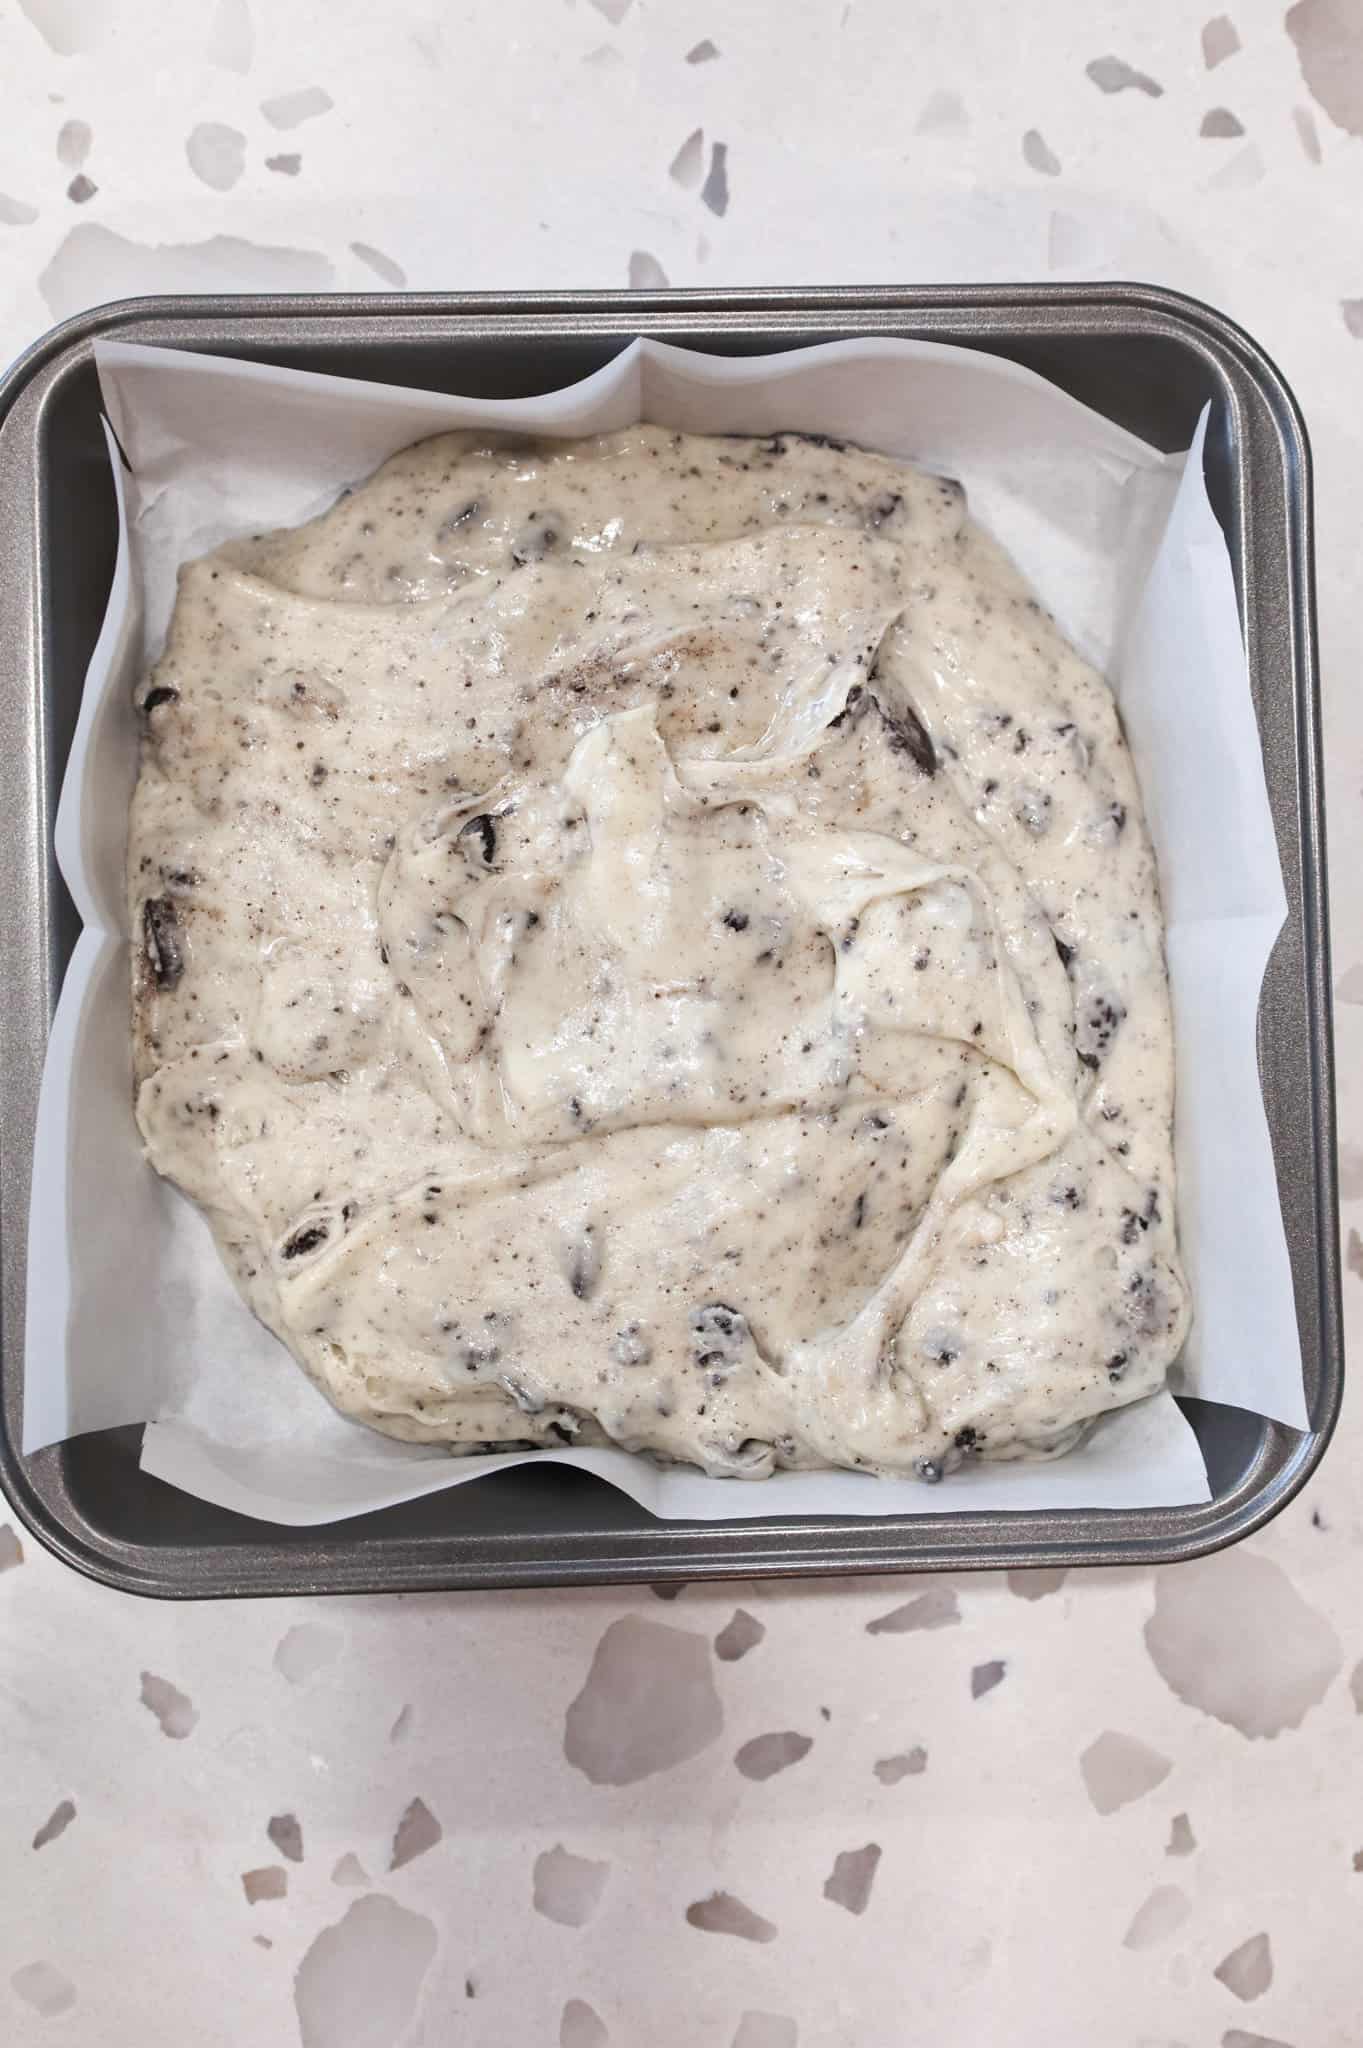 white chocolate and Oreo mixture in a parchment lined baking pan